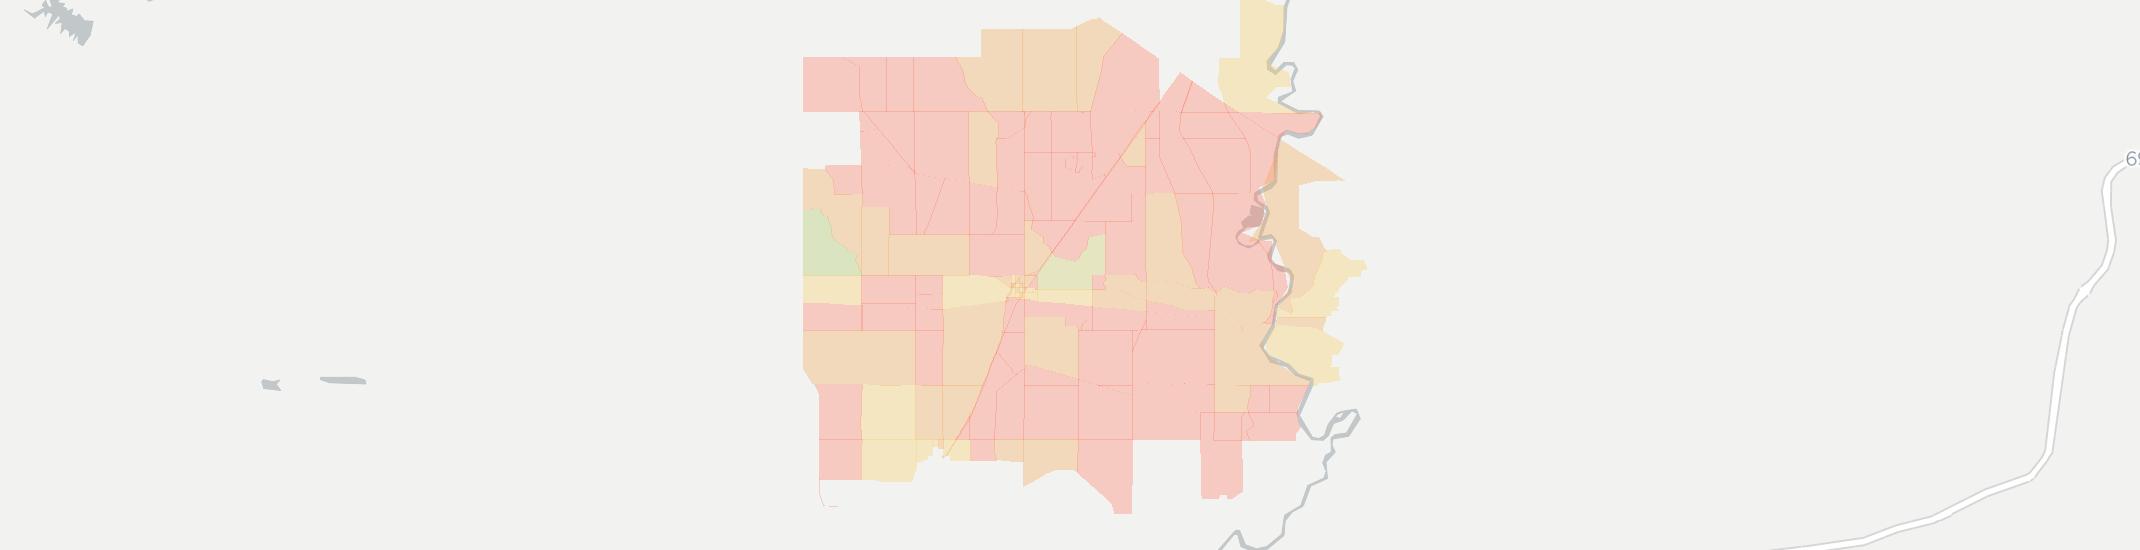 Switz City Internet Competition Map. Click for interactive map.